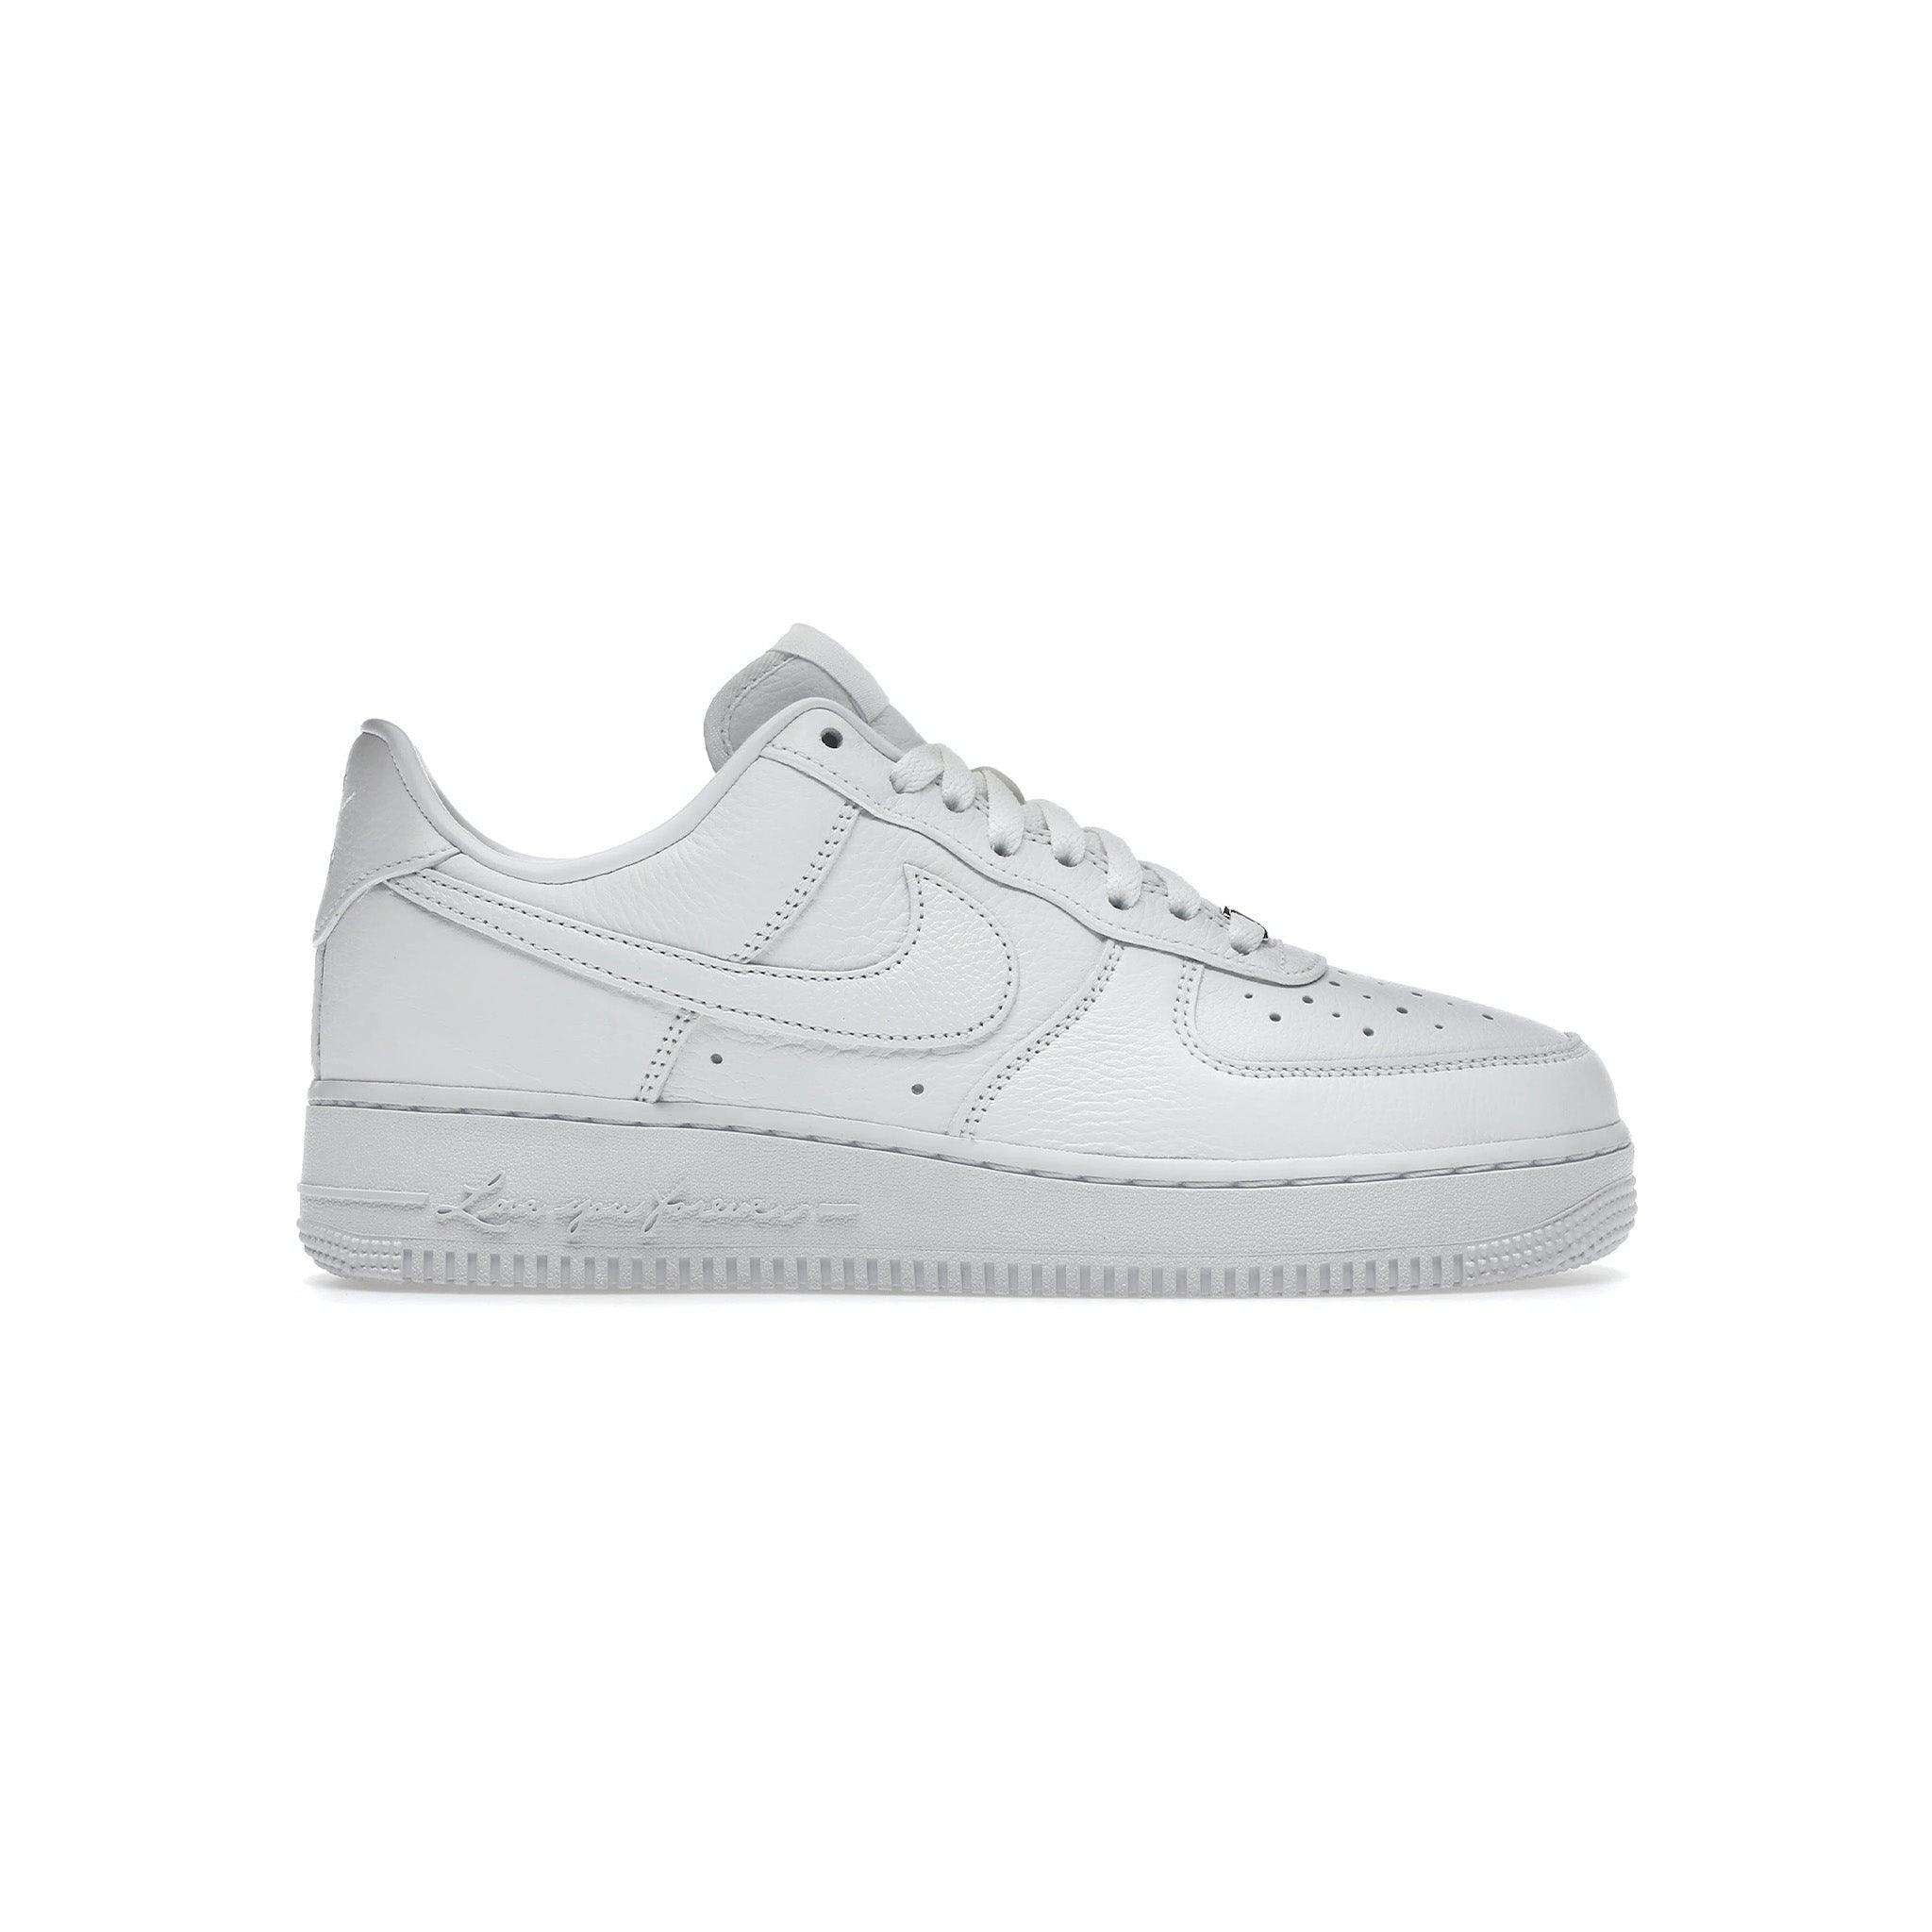 Nike Air Force 1 Low Stussy Fossil for Sale, Authenticity Guaranteed